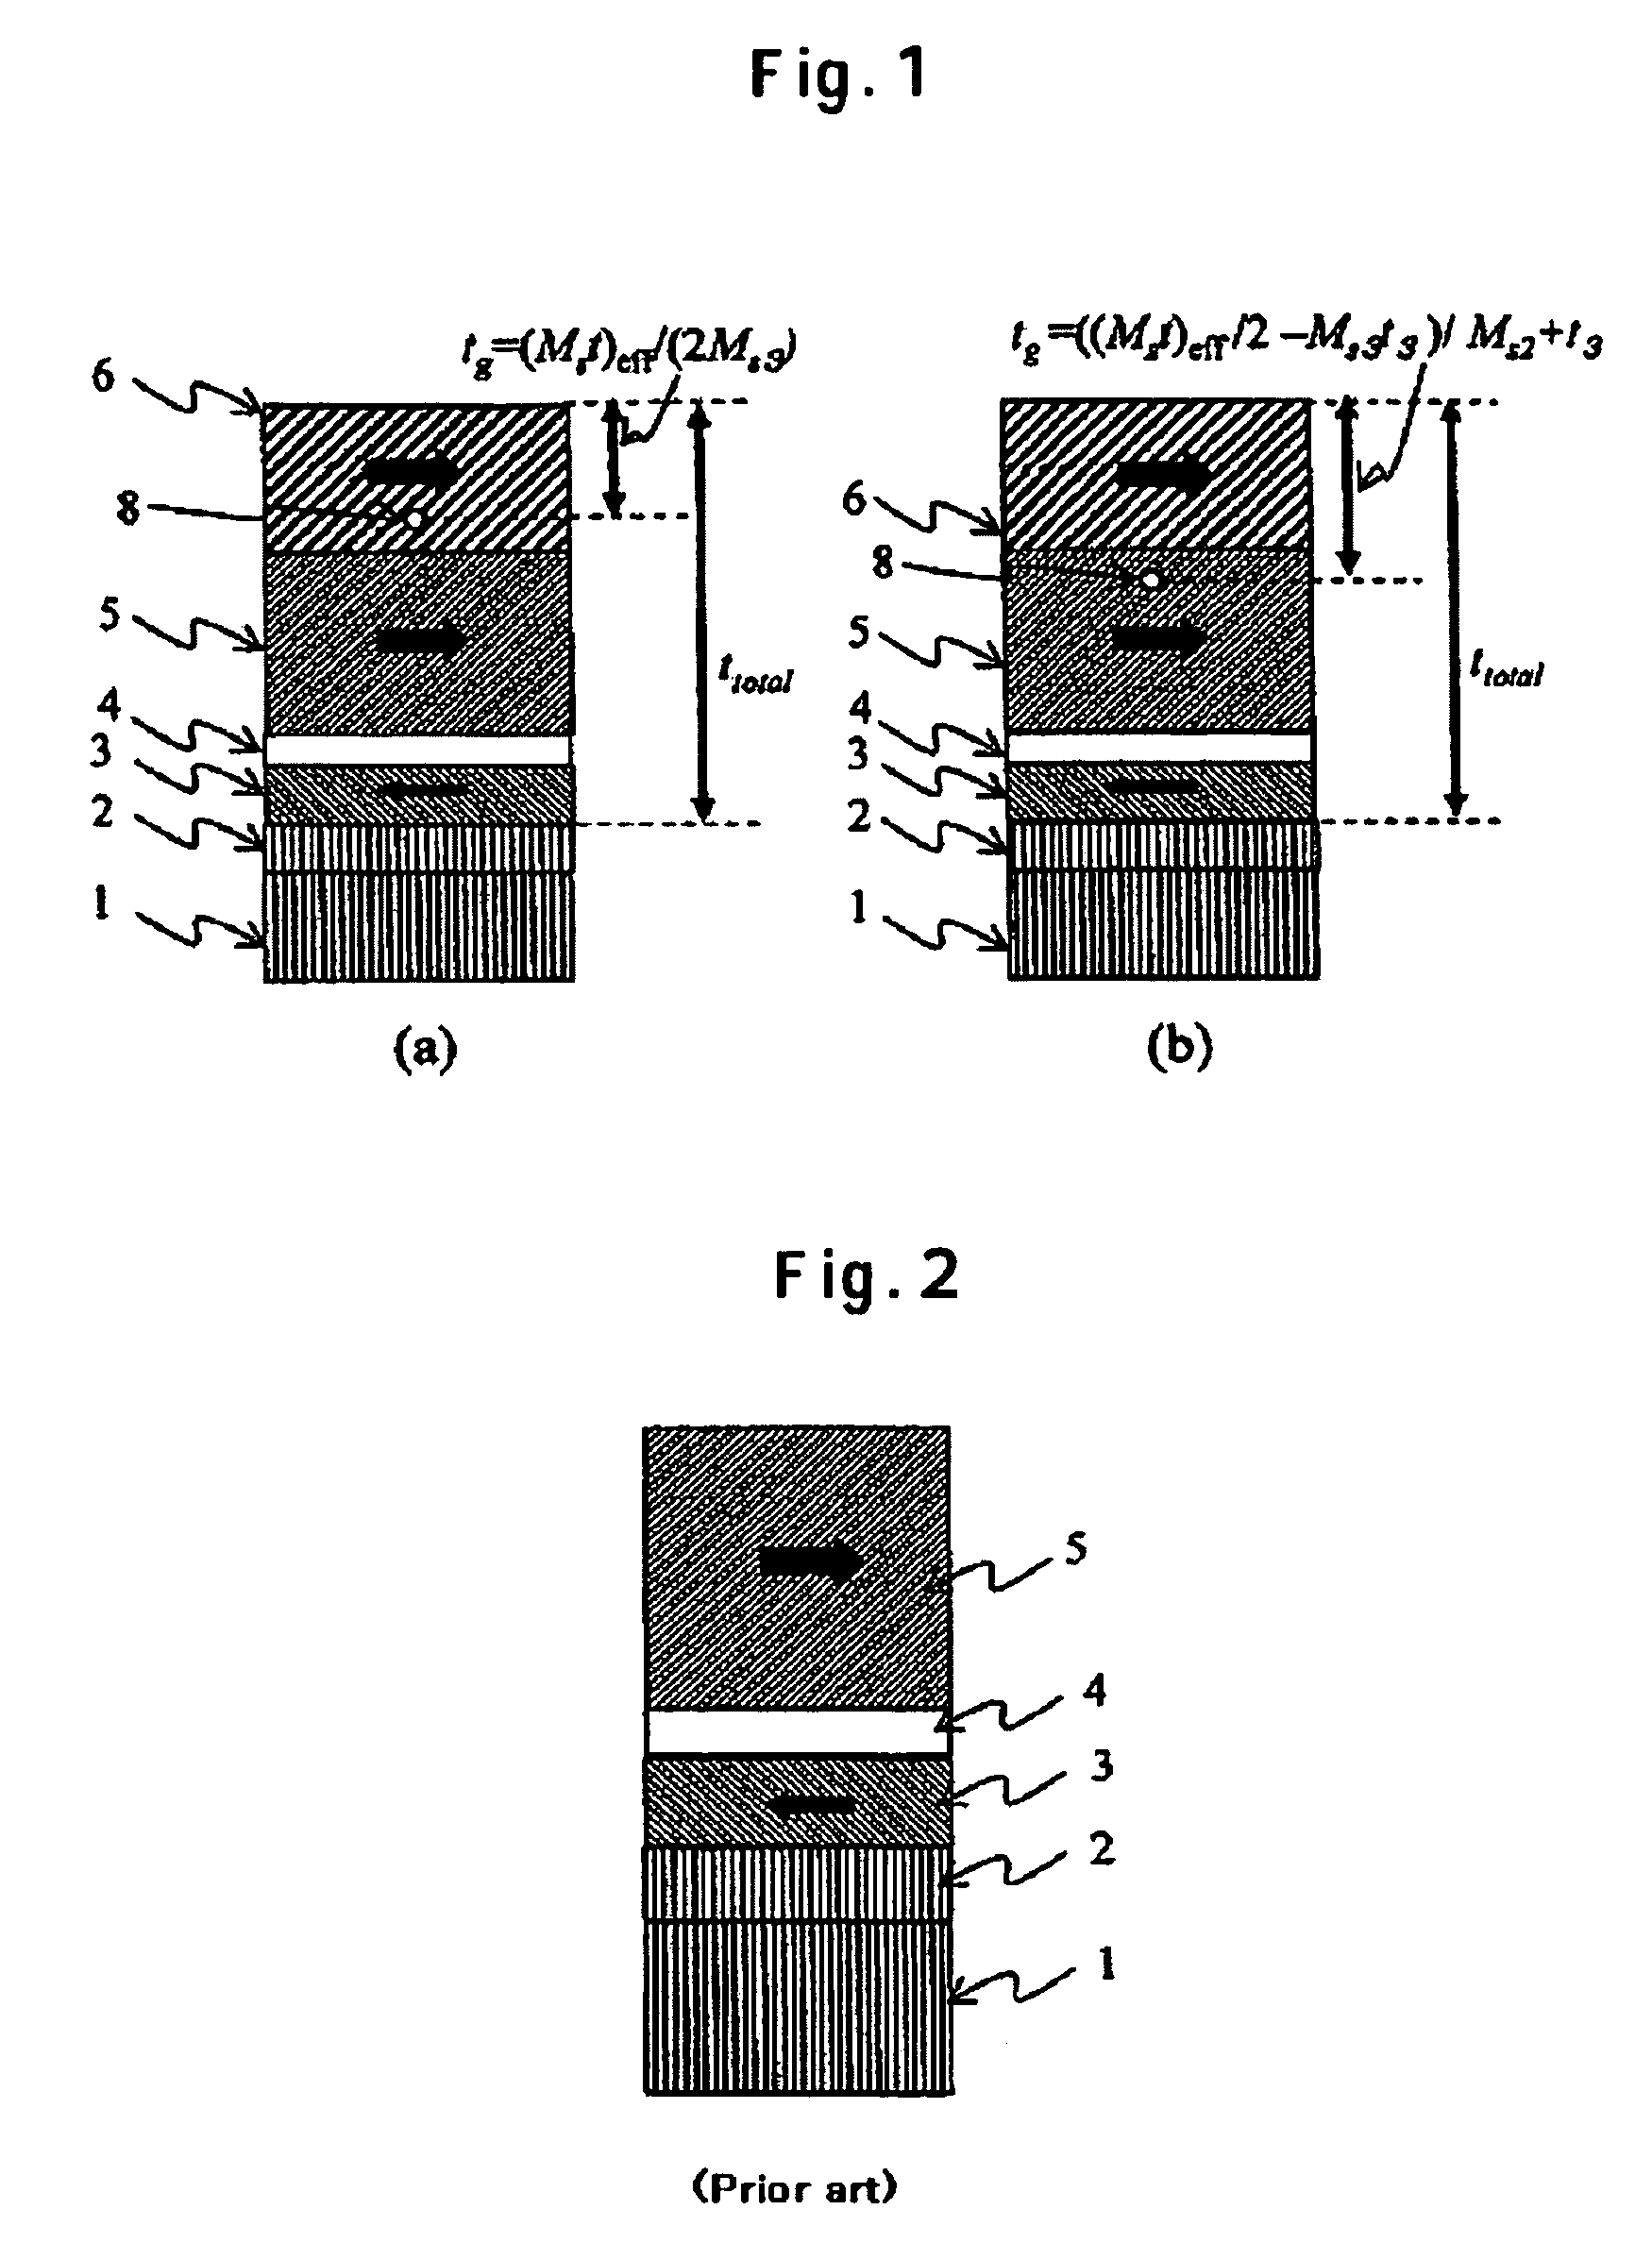 Magnetic recording media with ultra-high recording density